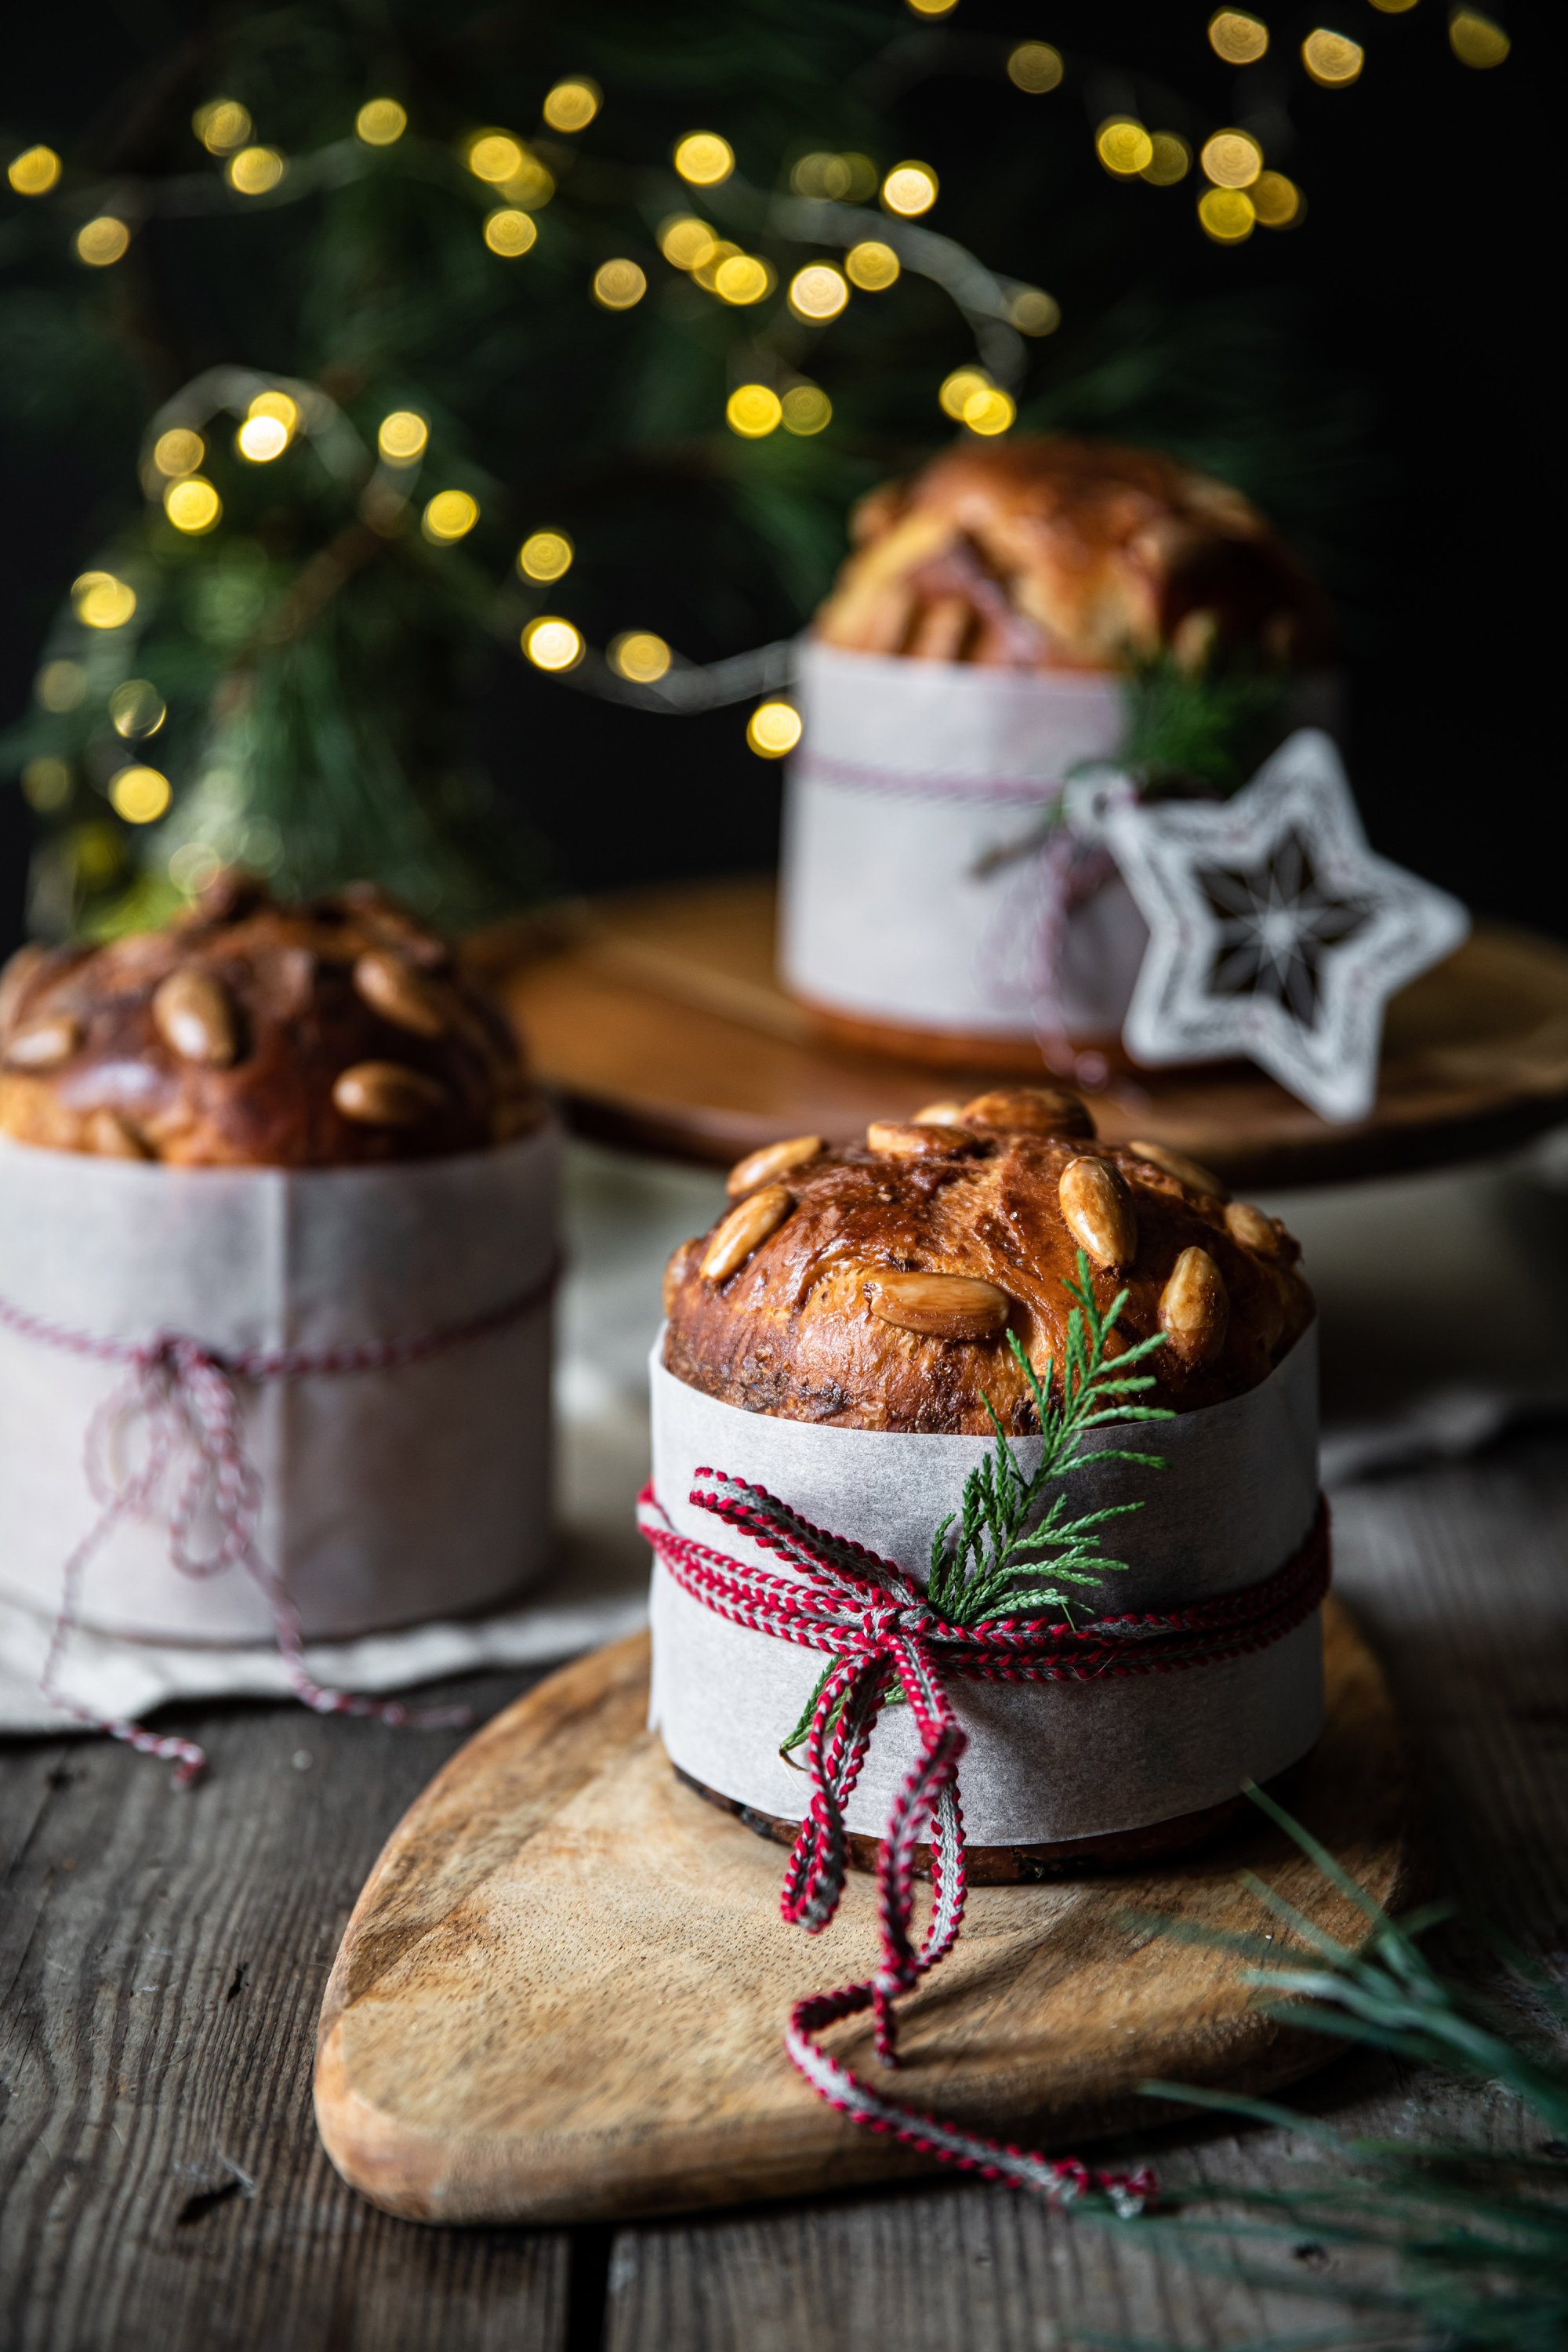 Originating from Milan, Panettone is enjoyed by Italians for Christmas and New Year